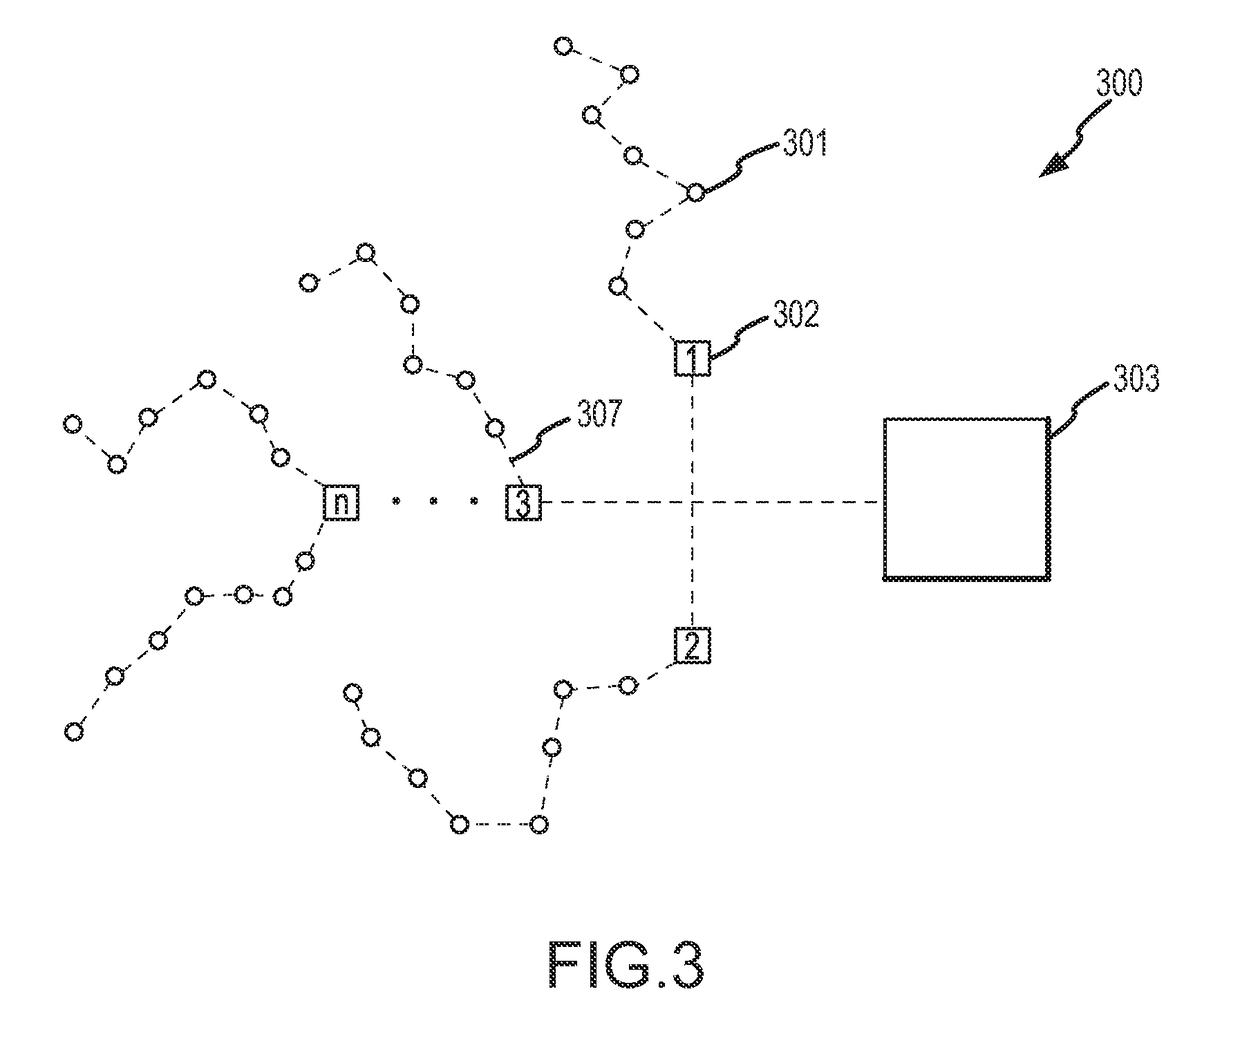 Multiplexing signature allocation for wireless exploration system